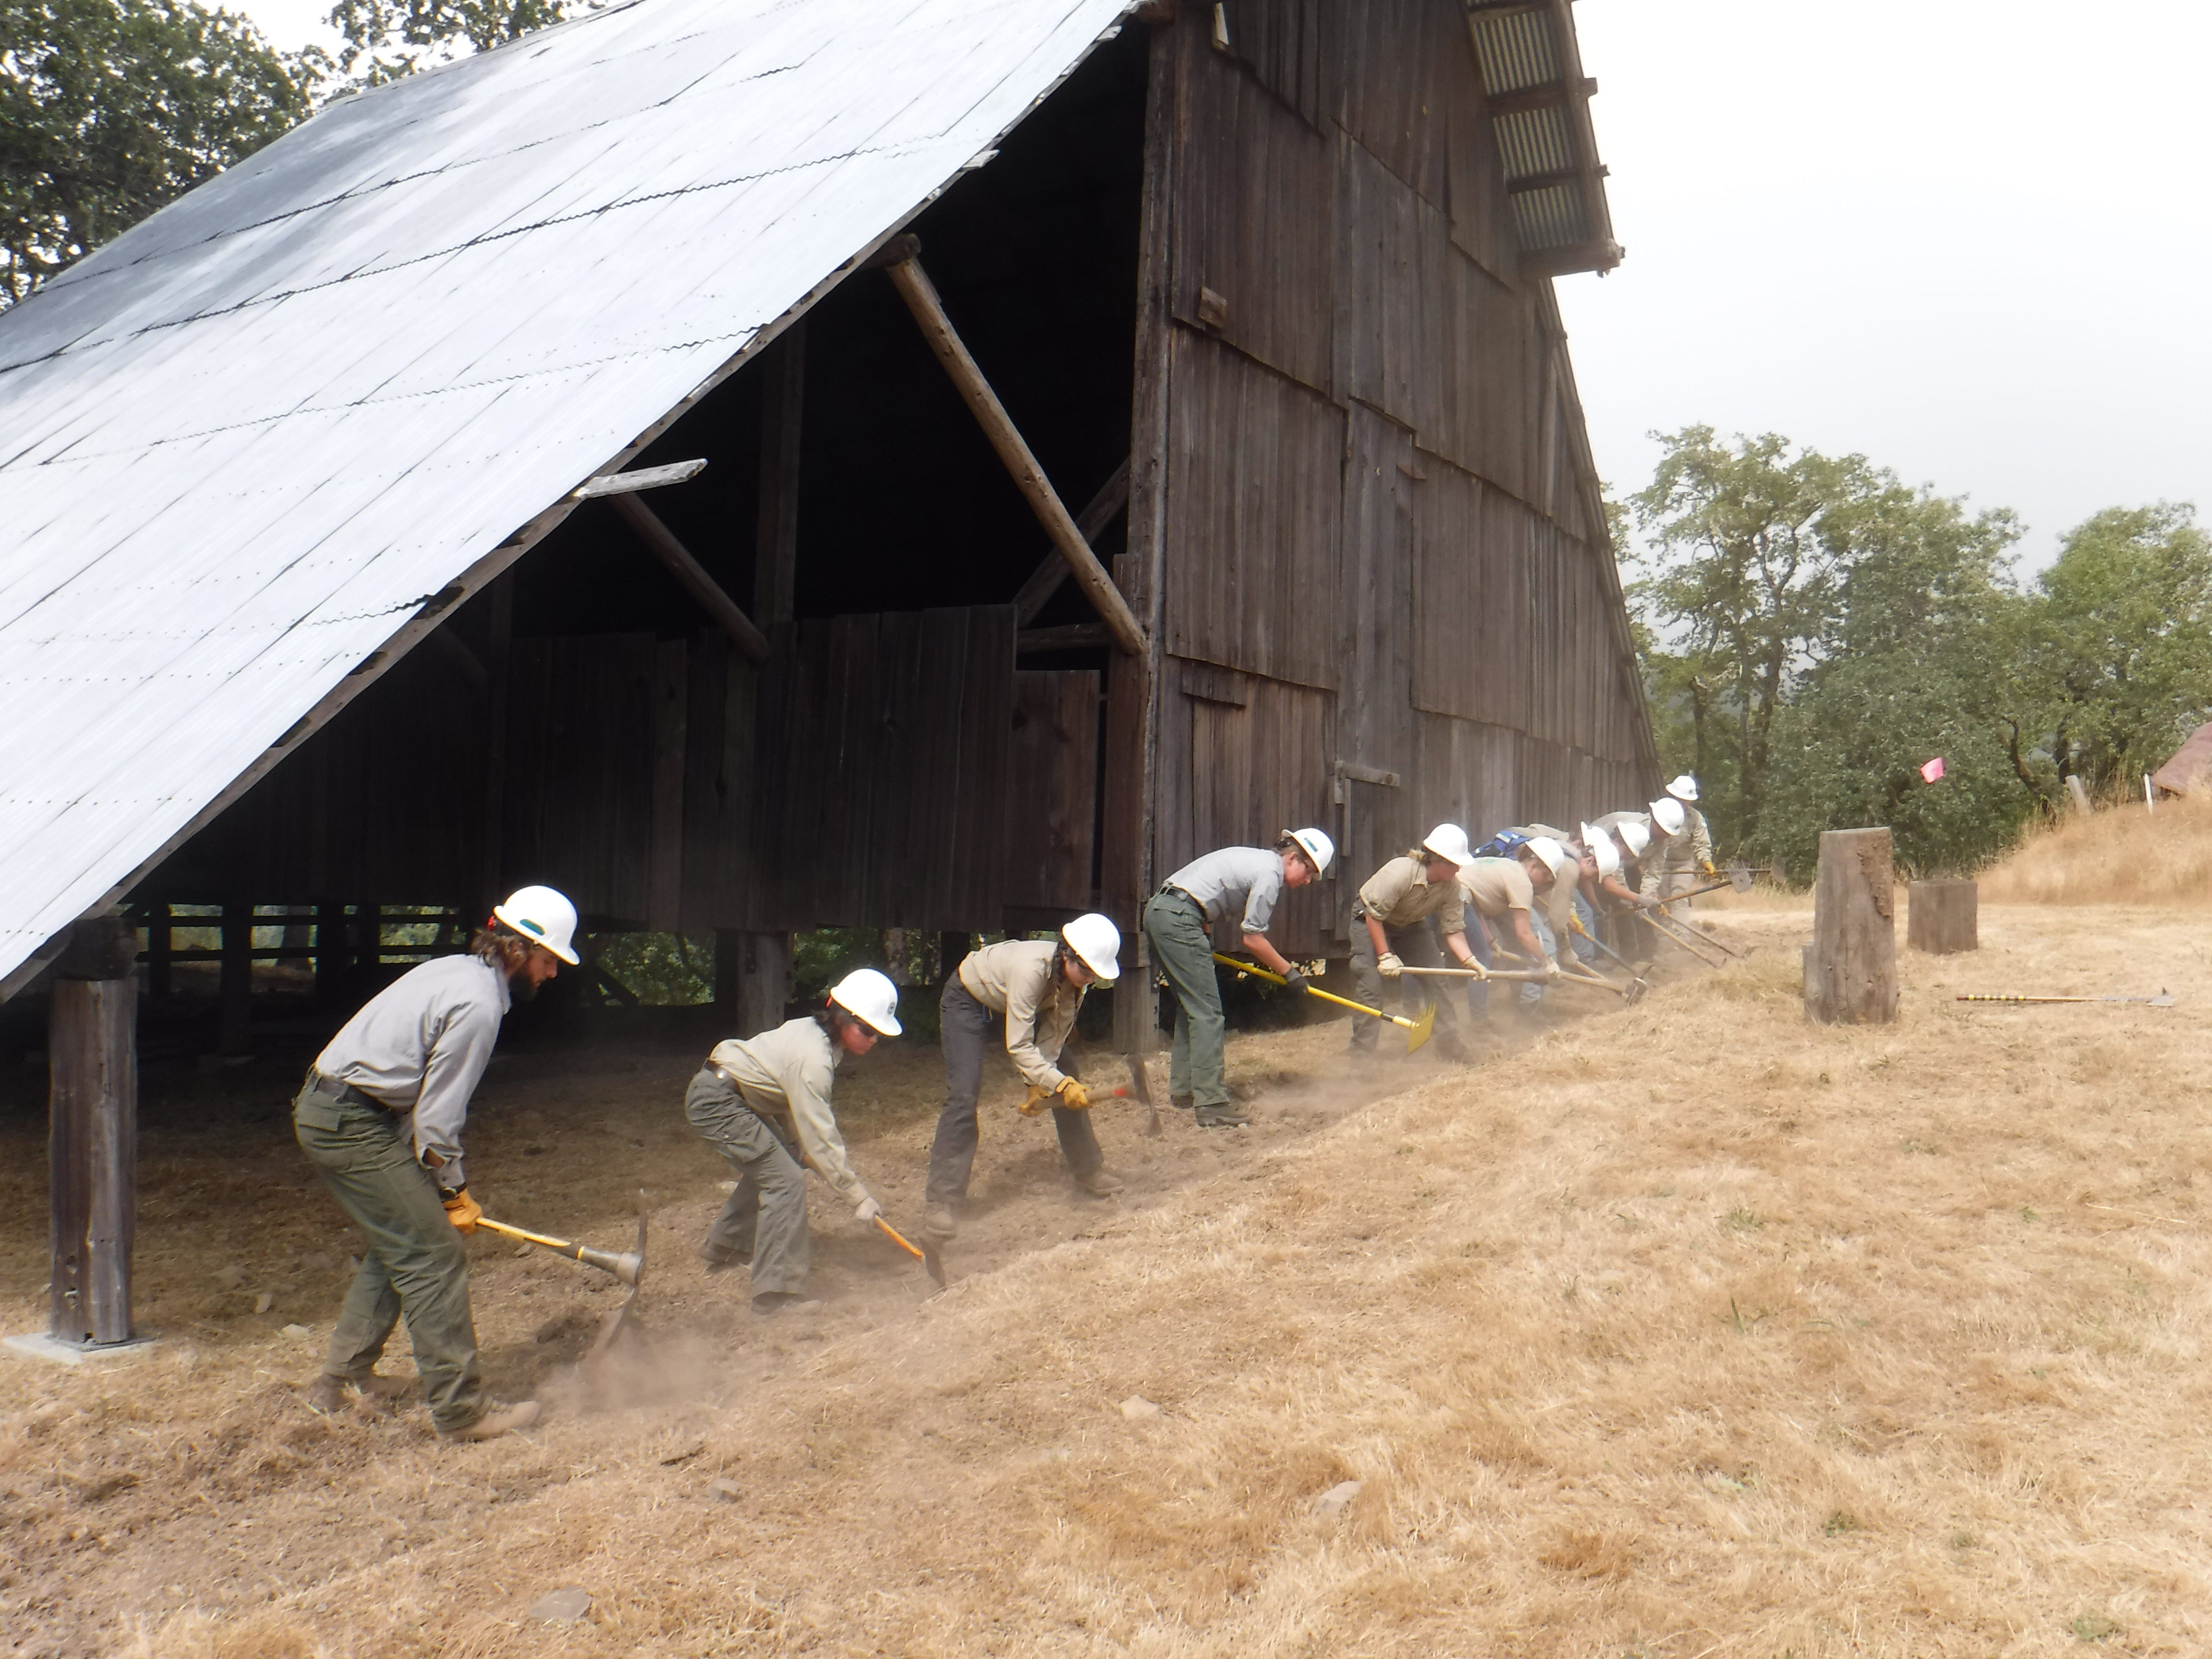 A dozen young adults use hand tools next to a historic barn